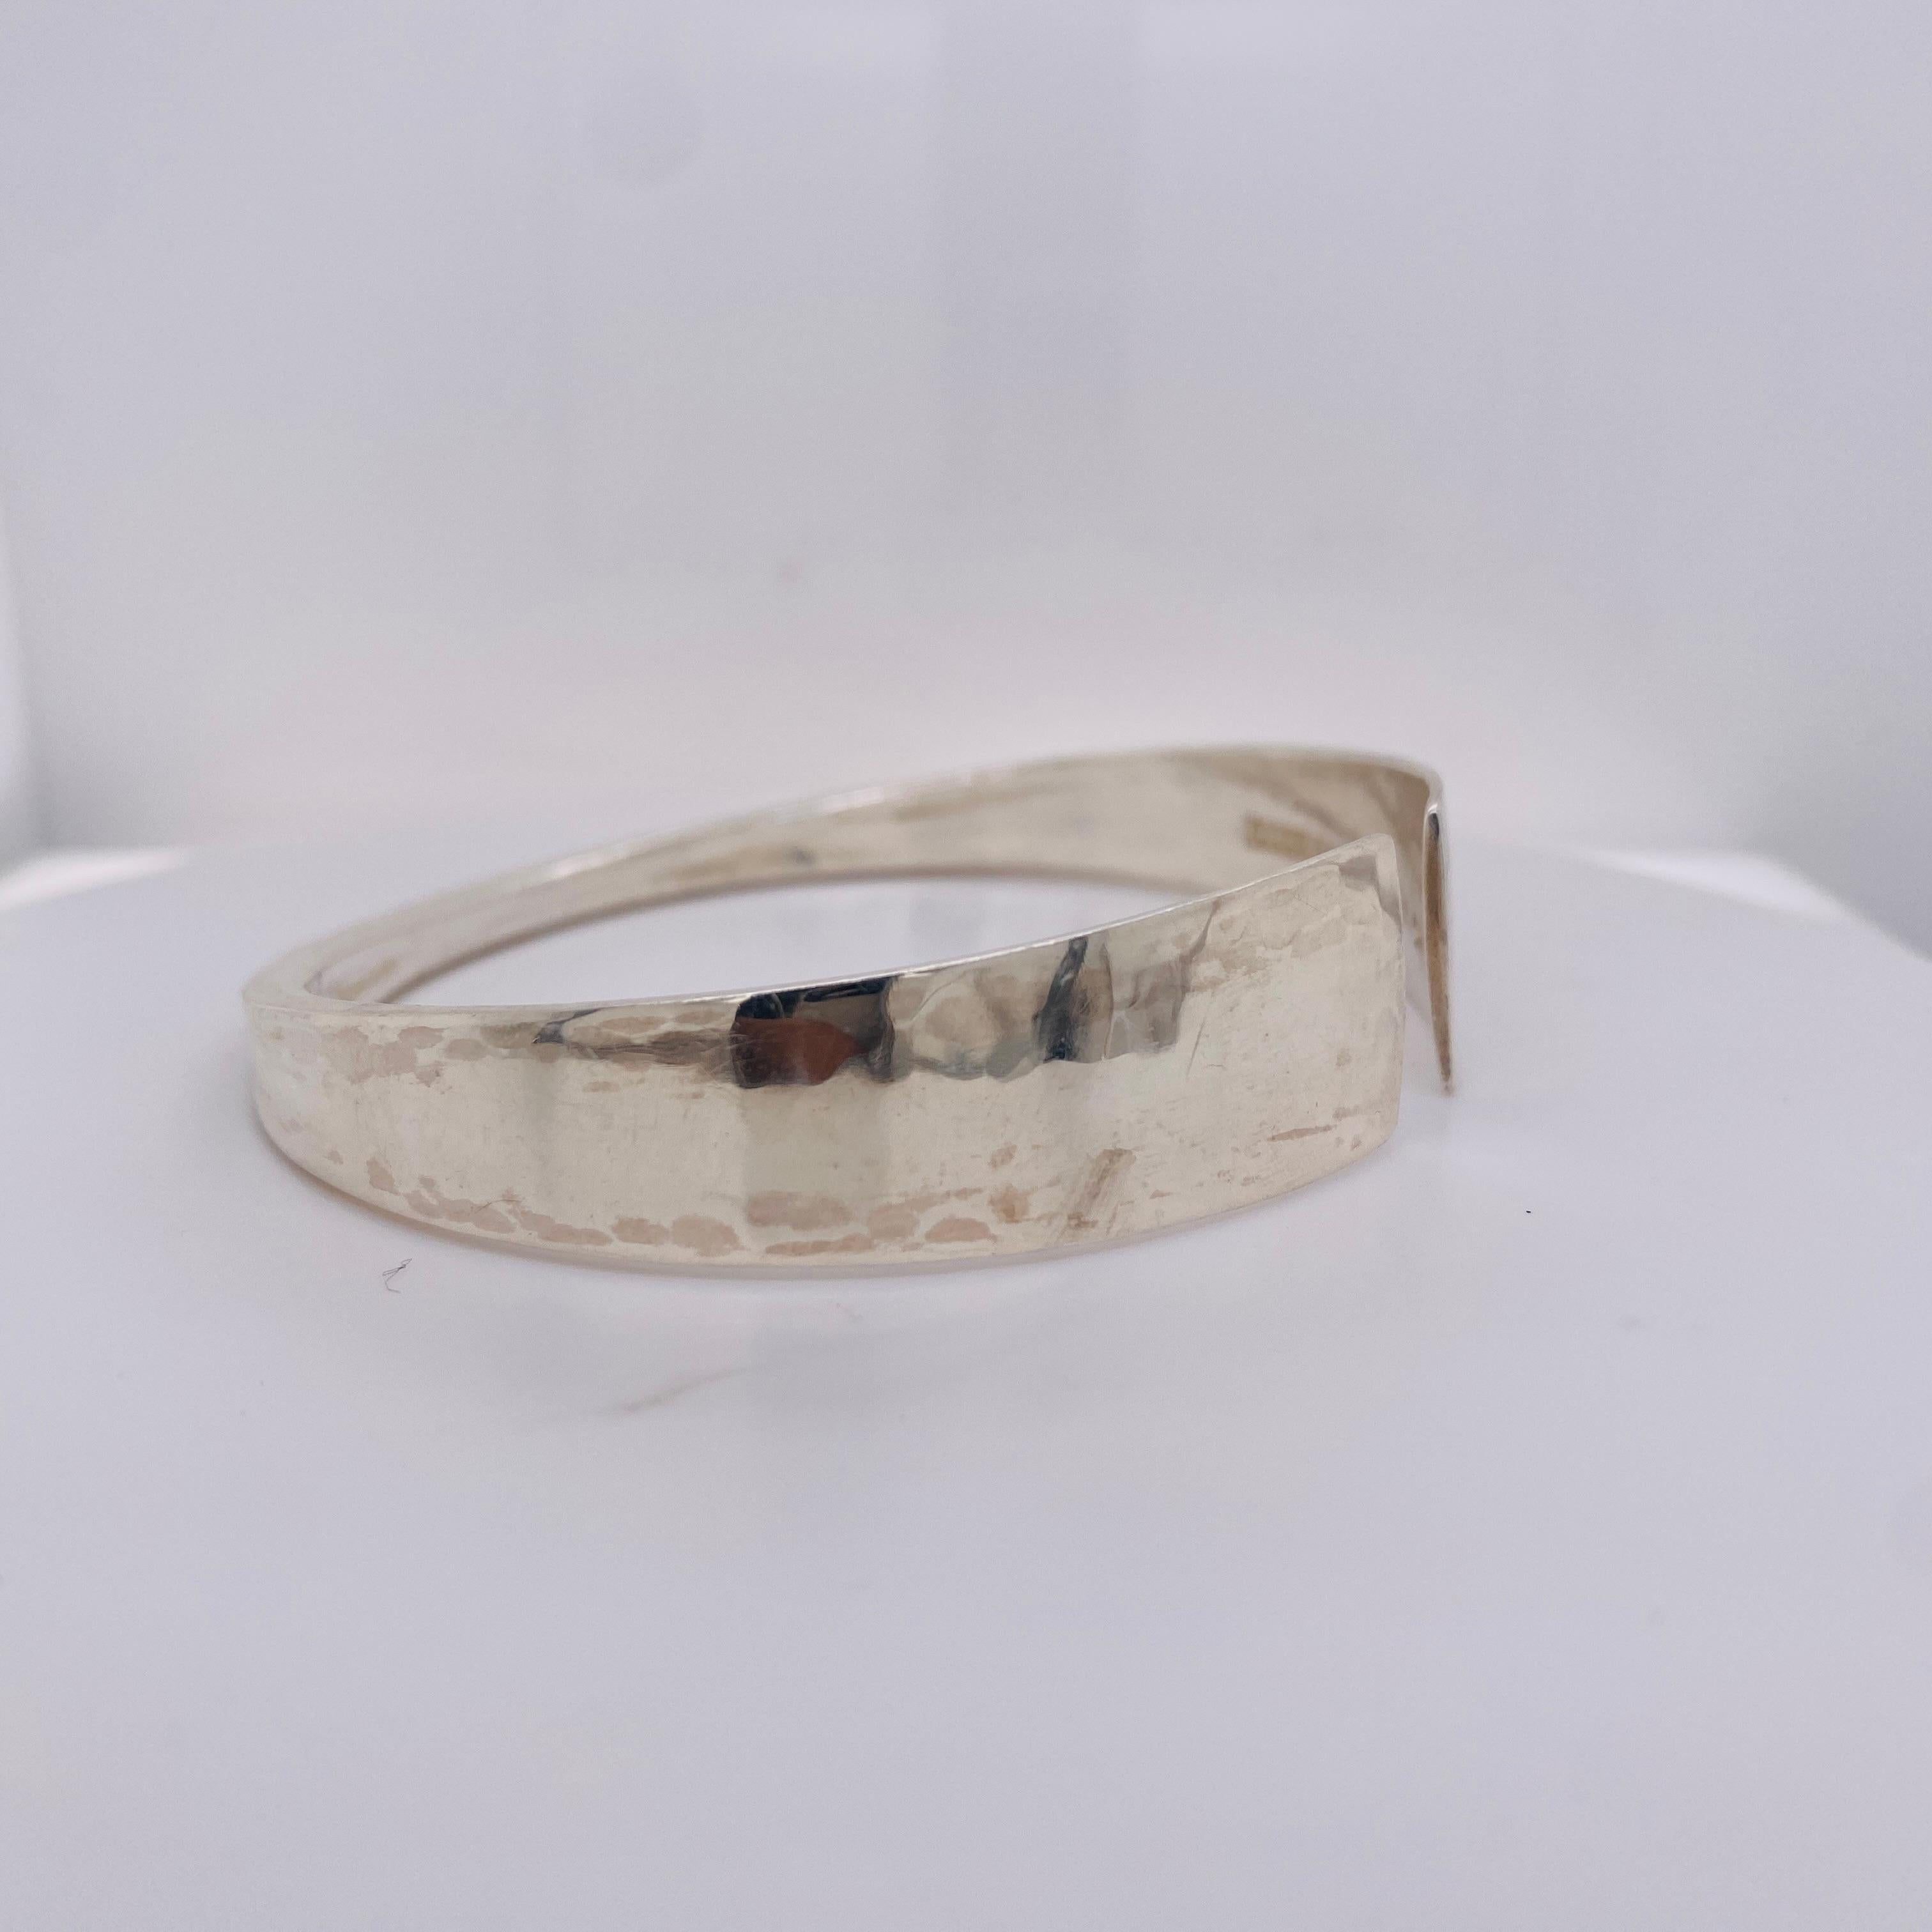 Olov Barve (1930-2014) for Ibe Dahlquist, Visby 1970s. A heavy sterling silver bangle. Lightly hammered surface. Perfect condition. Inside measurements 6.0cm x 5.5cm. With Swedish silver marks 